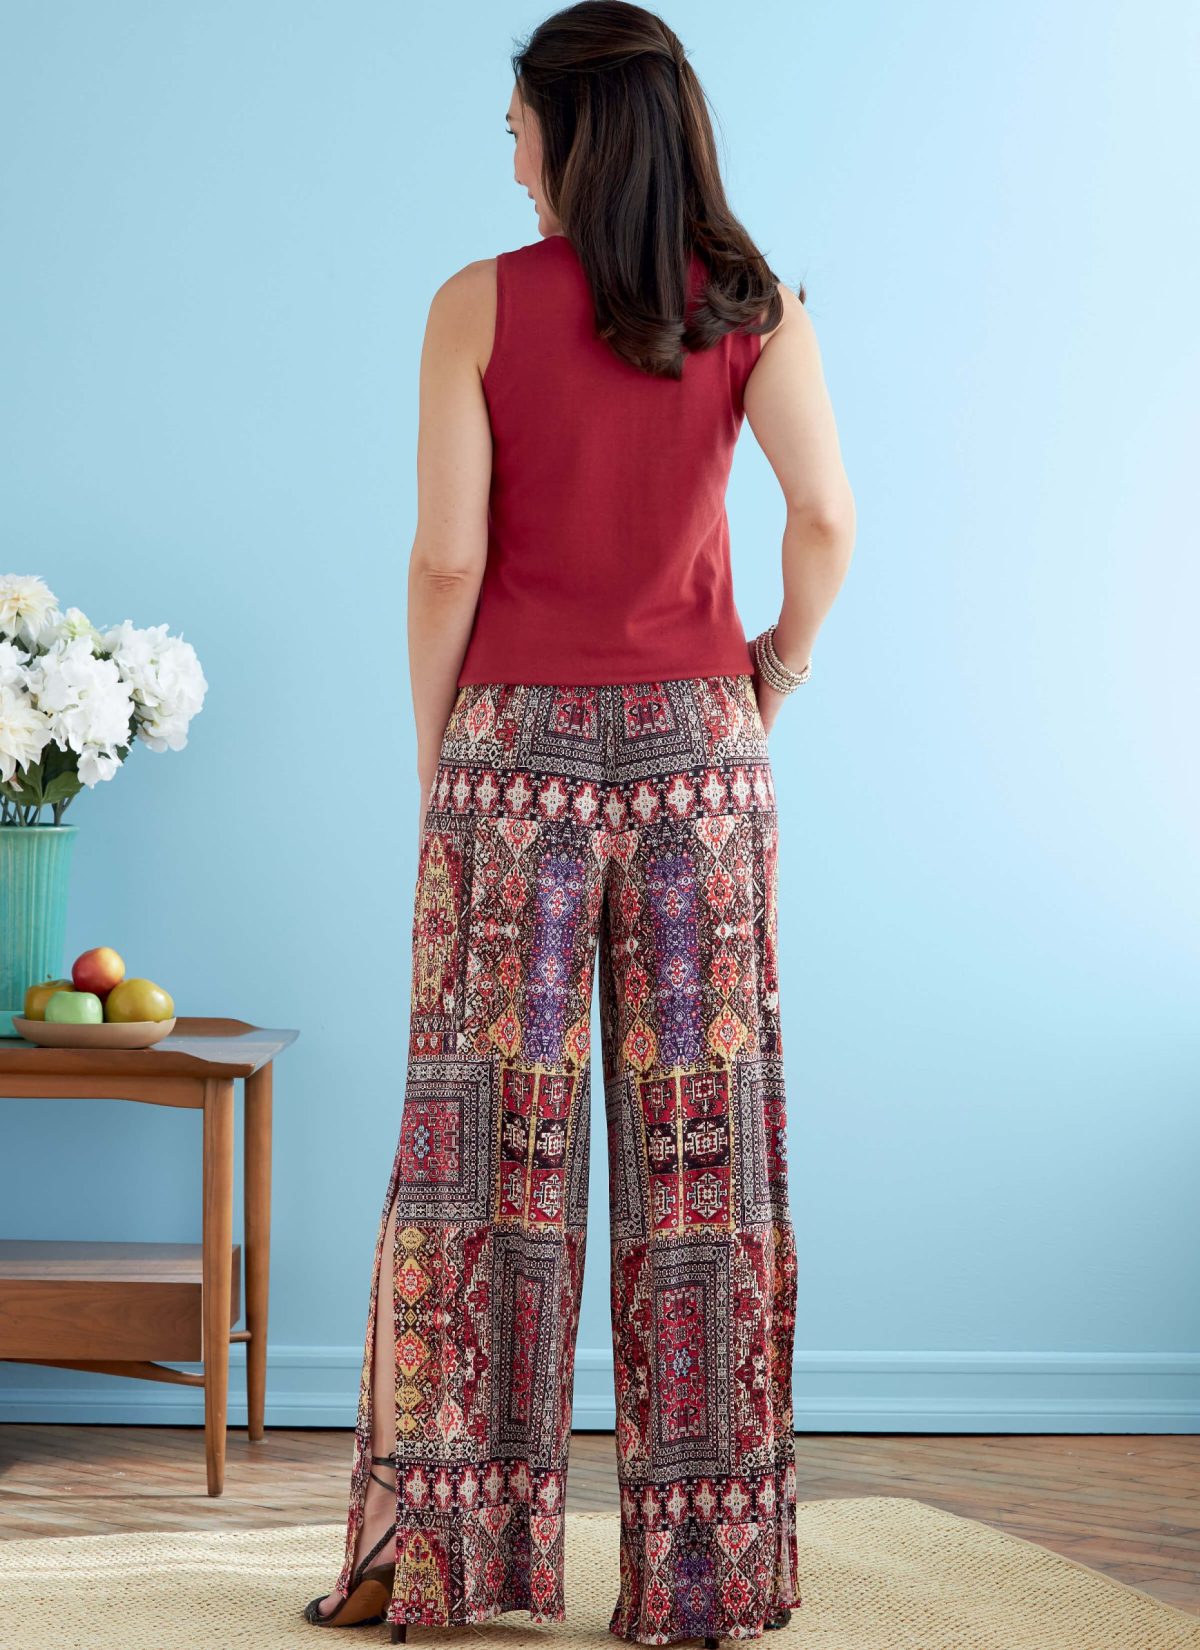 Butterick Sewing Pattern B6750 Misses' Elasticated-Waist Shorts and Trousers